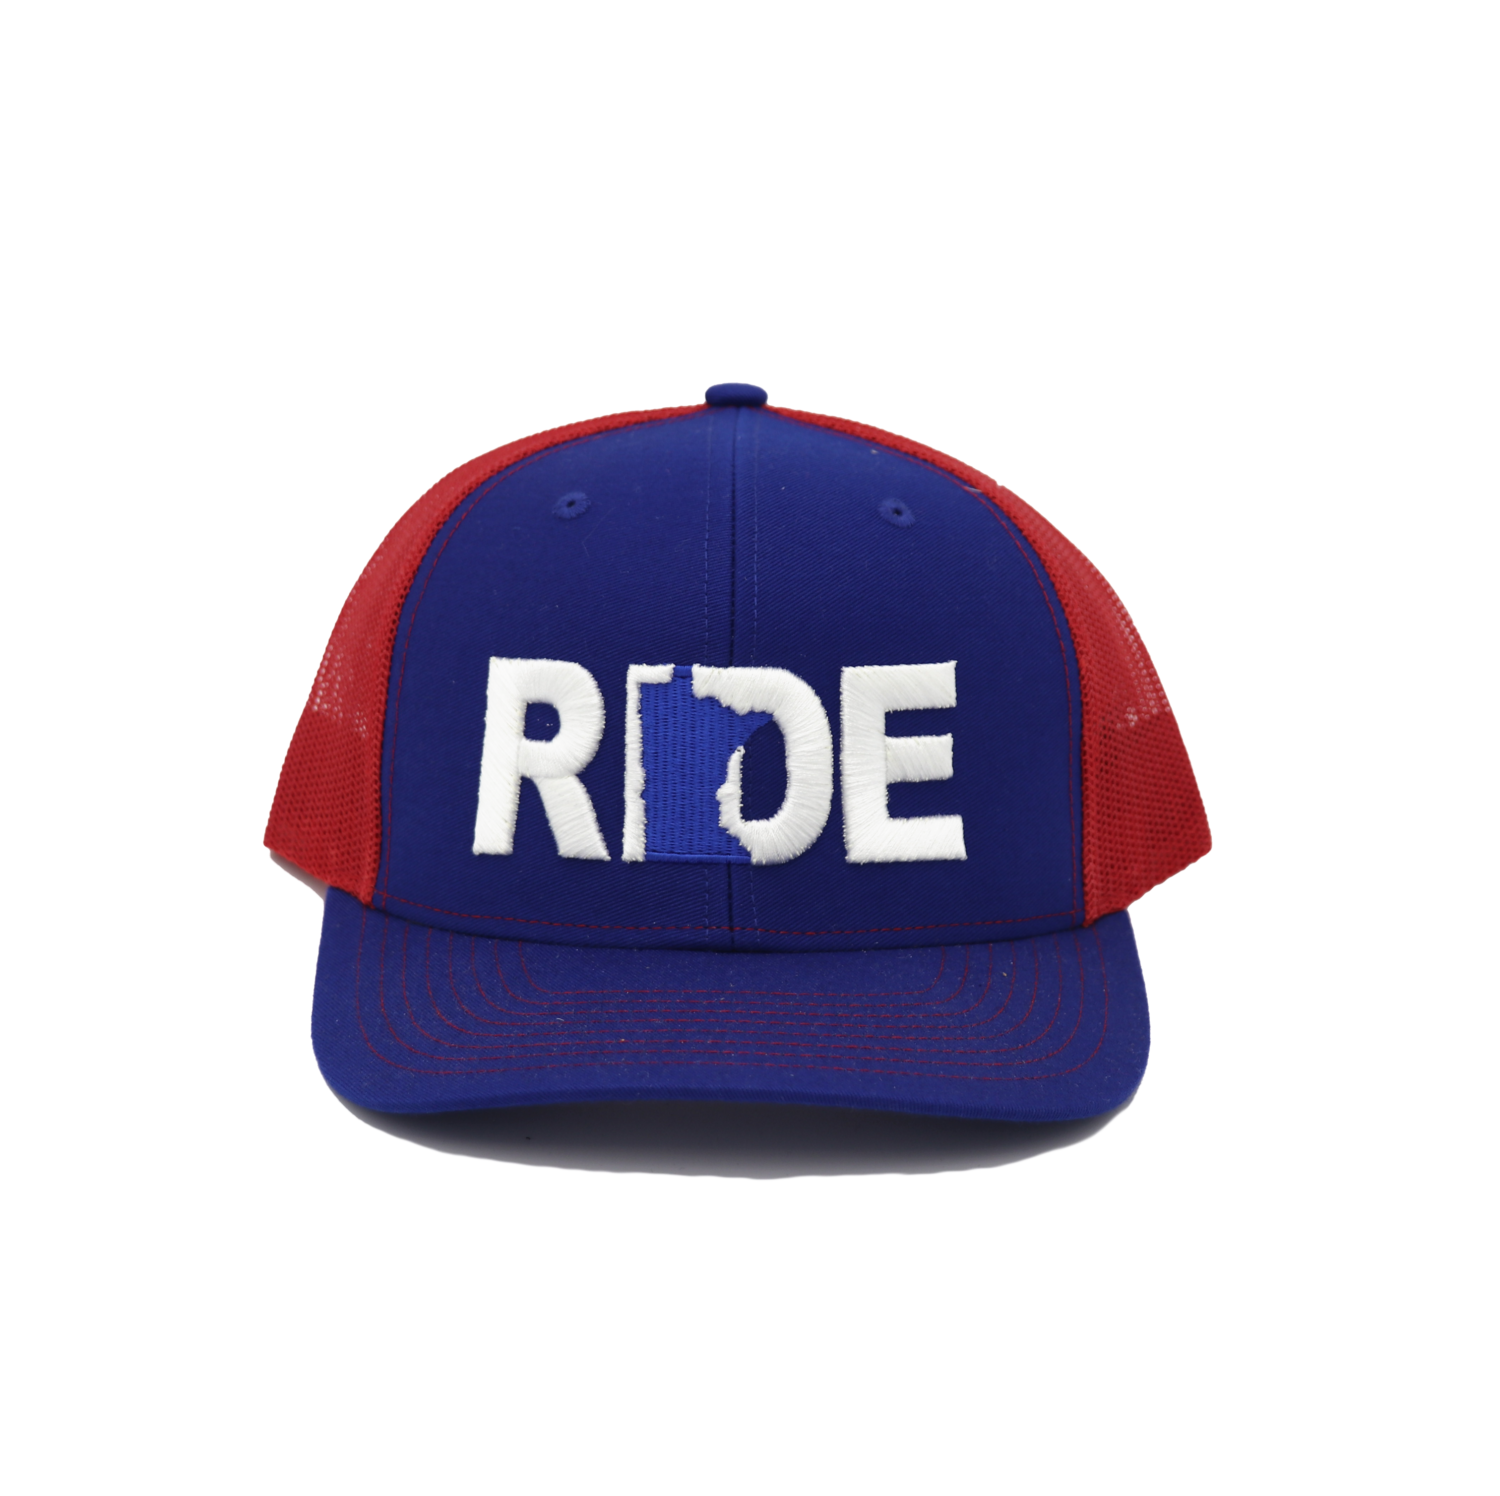 Ride Minnesota Classic Embroidered Snapback Trucker Hat Blue/Red/White